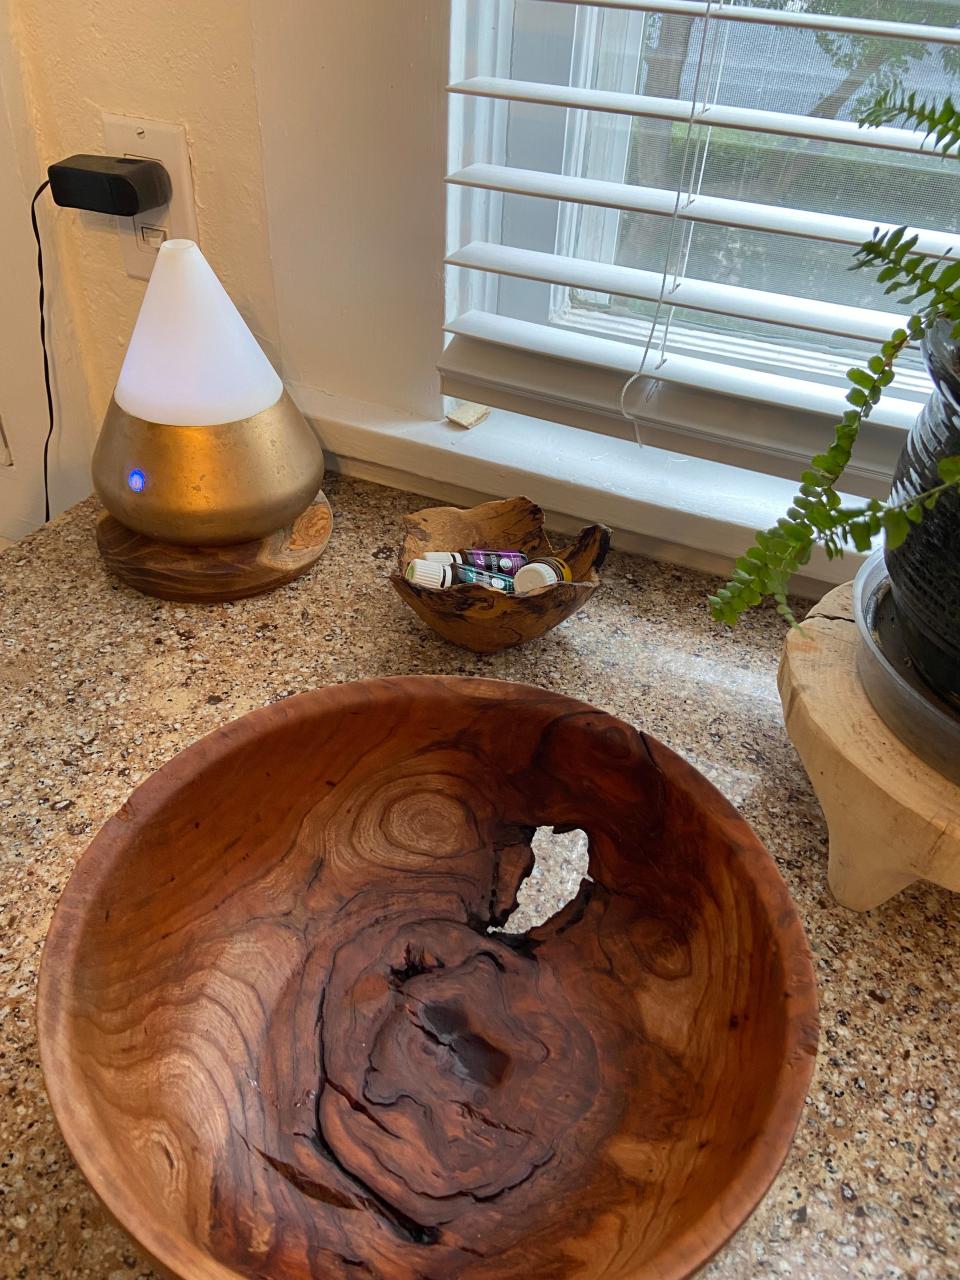 A piece of cherry wood was carved and shaped into a bowl that stays in Stephen Holmes' kitchen along with an oil diffuser stand, a small bowl to hold essential oils and a plant stand.